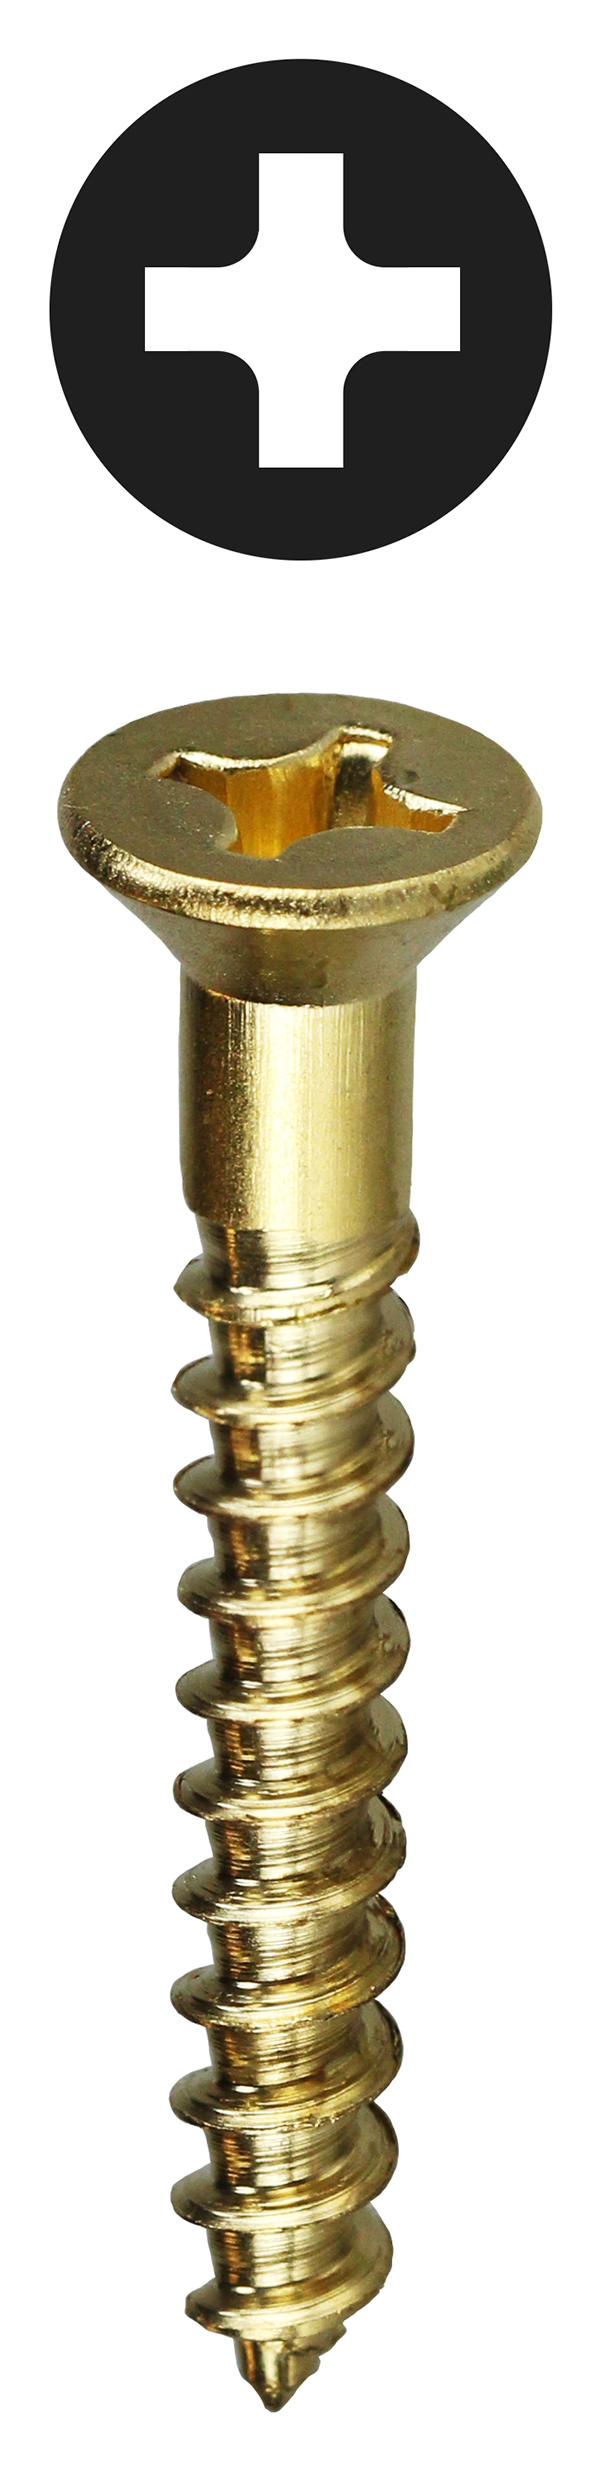 Flat Head Wood Screw, Brass material, #8 x 3/4 in. Size, Zinc Plated Finish, Phillips drive type